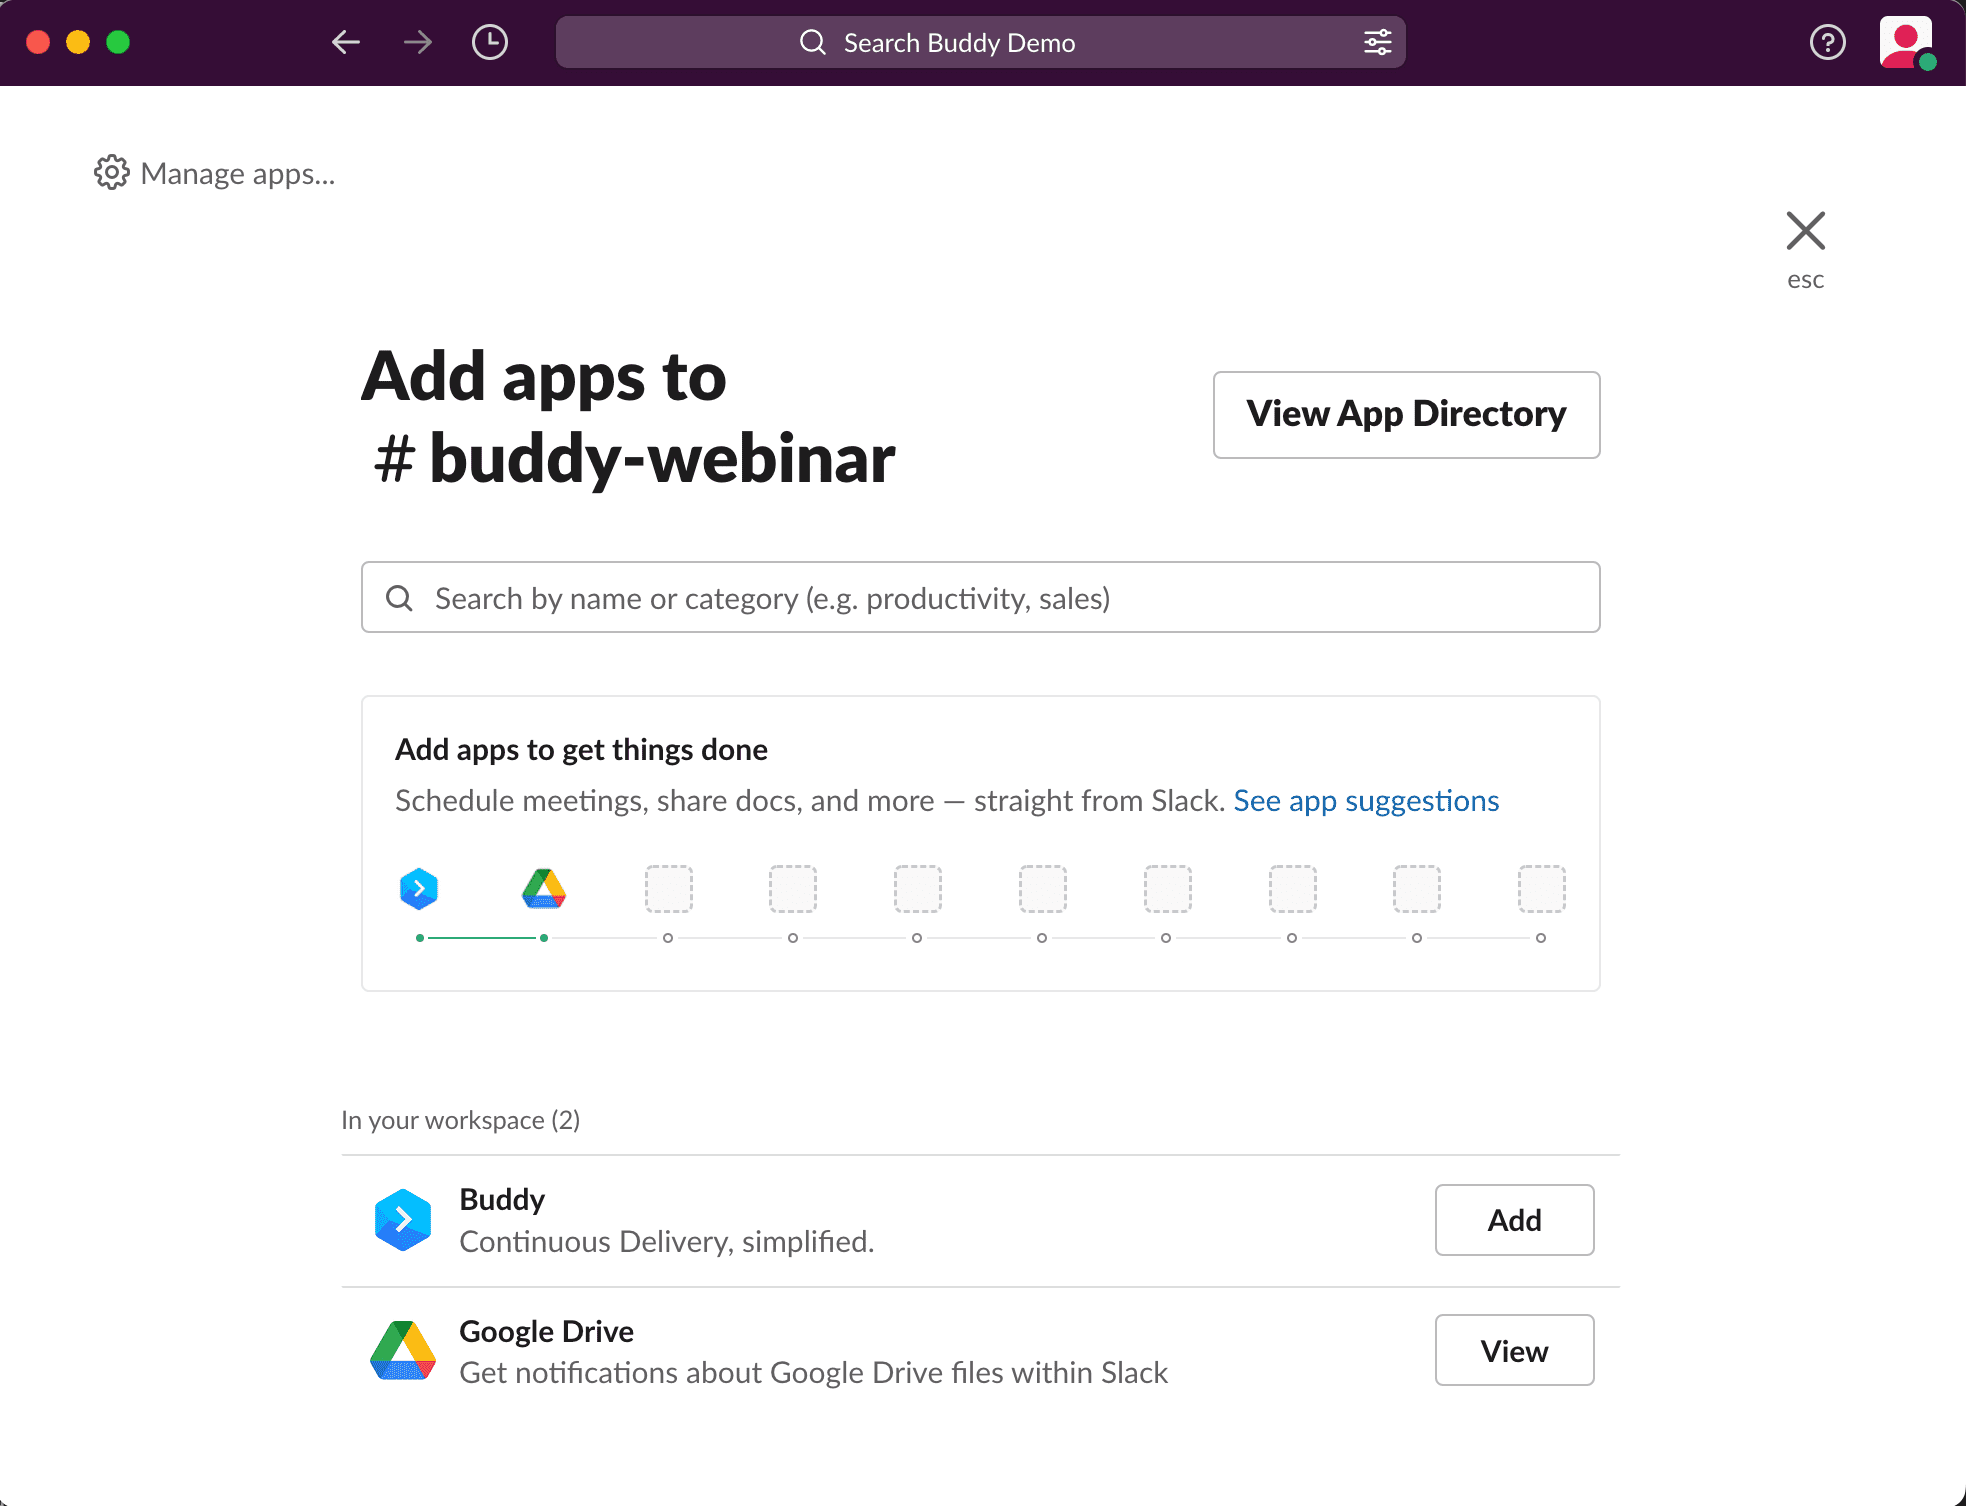 Adding Buddy app to the channel